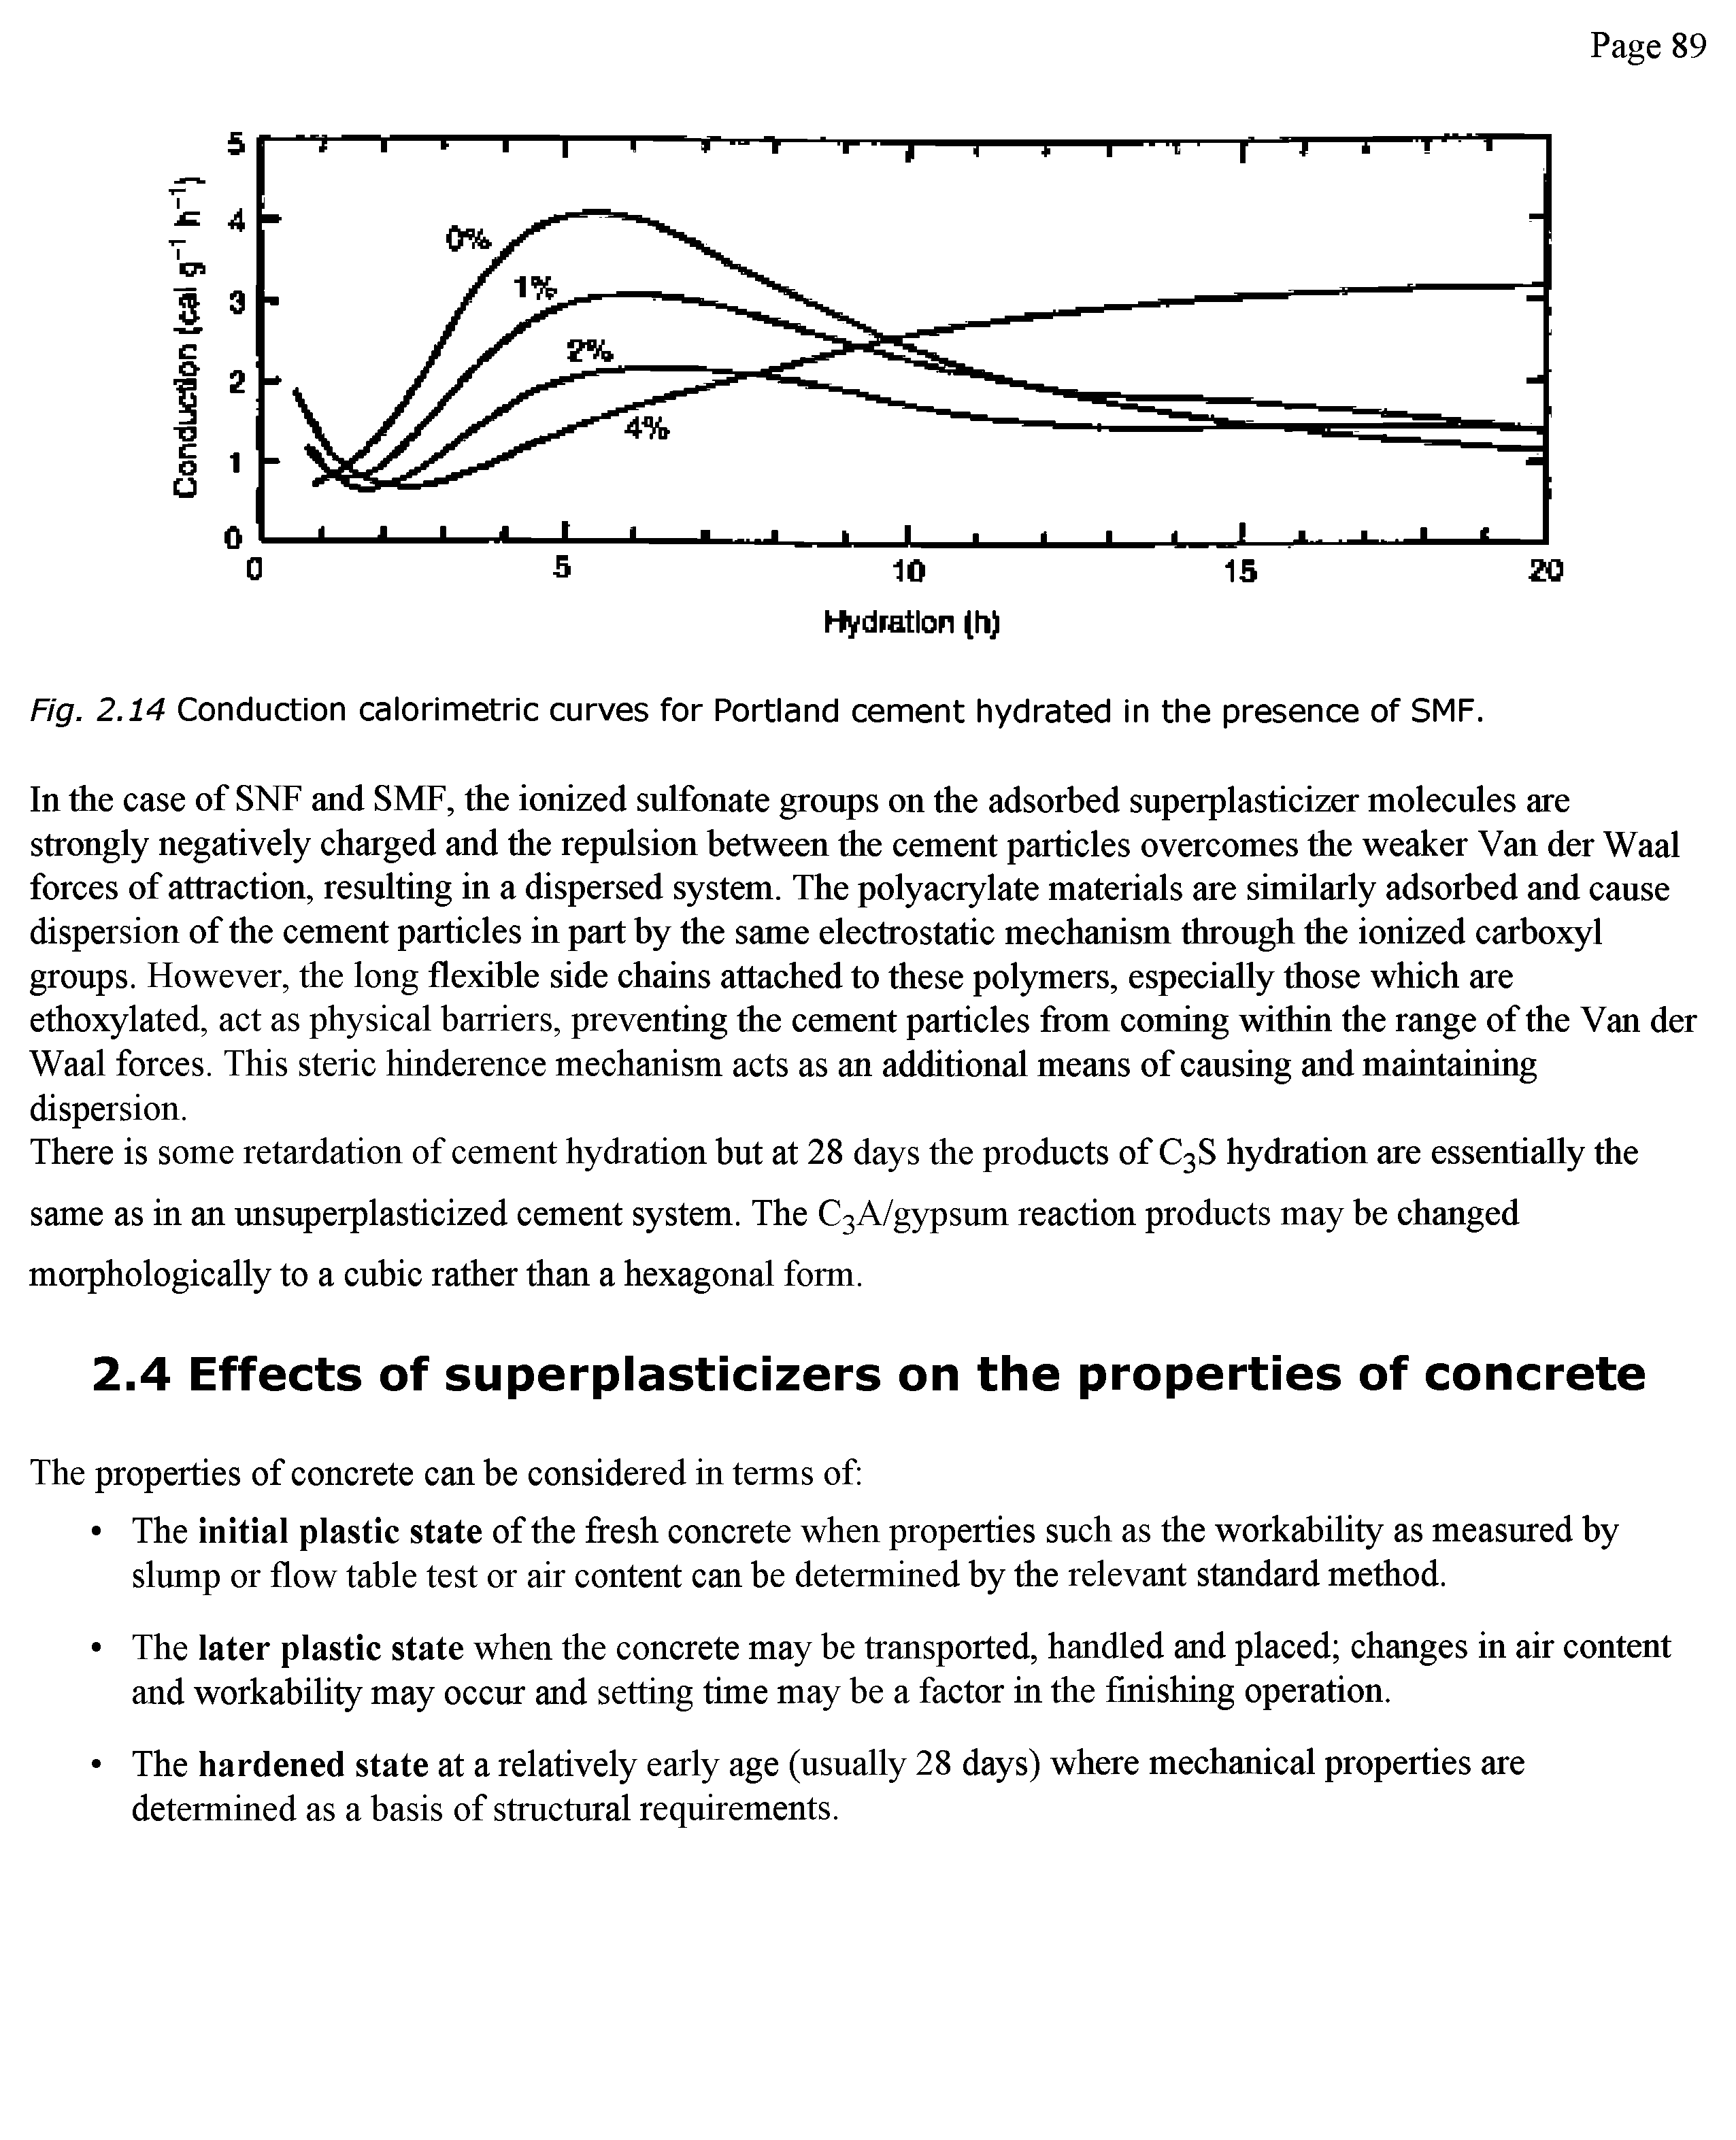 Fig. 2.14 Conduction calorimetric curves for Portland cement hydrated in the presence of SMF.